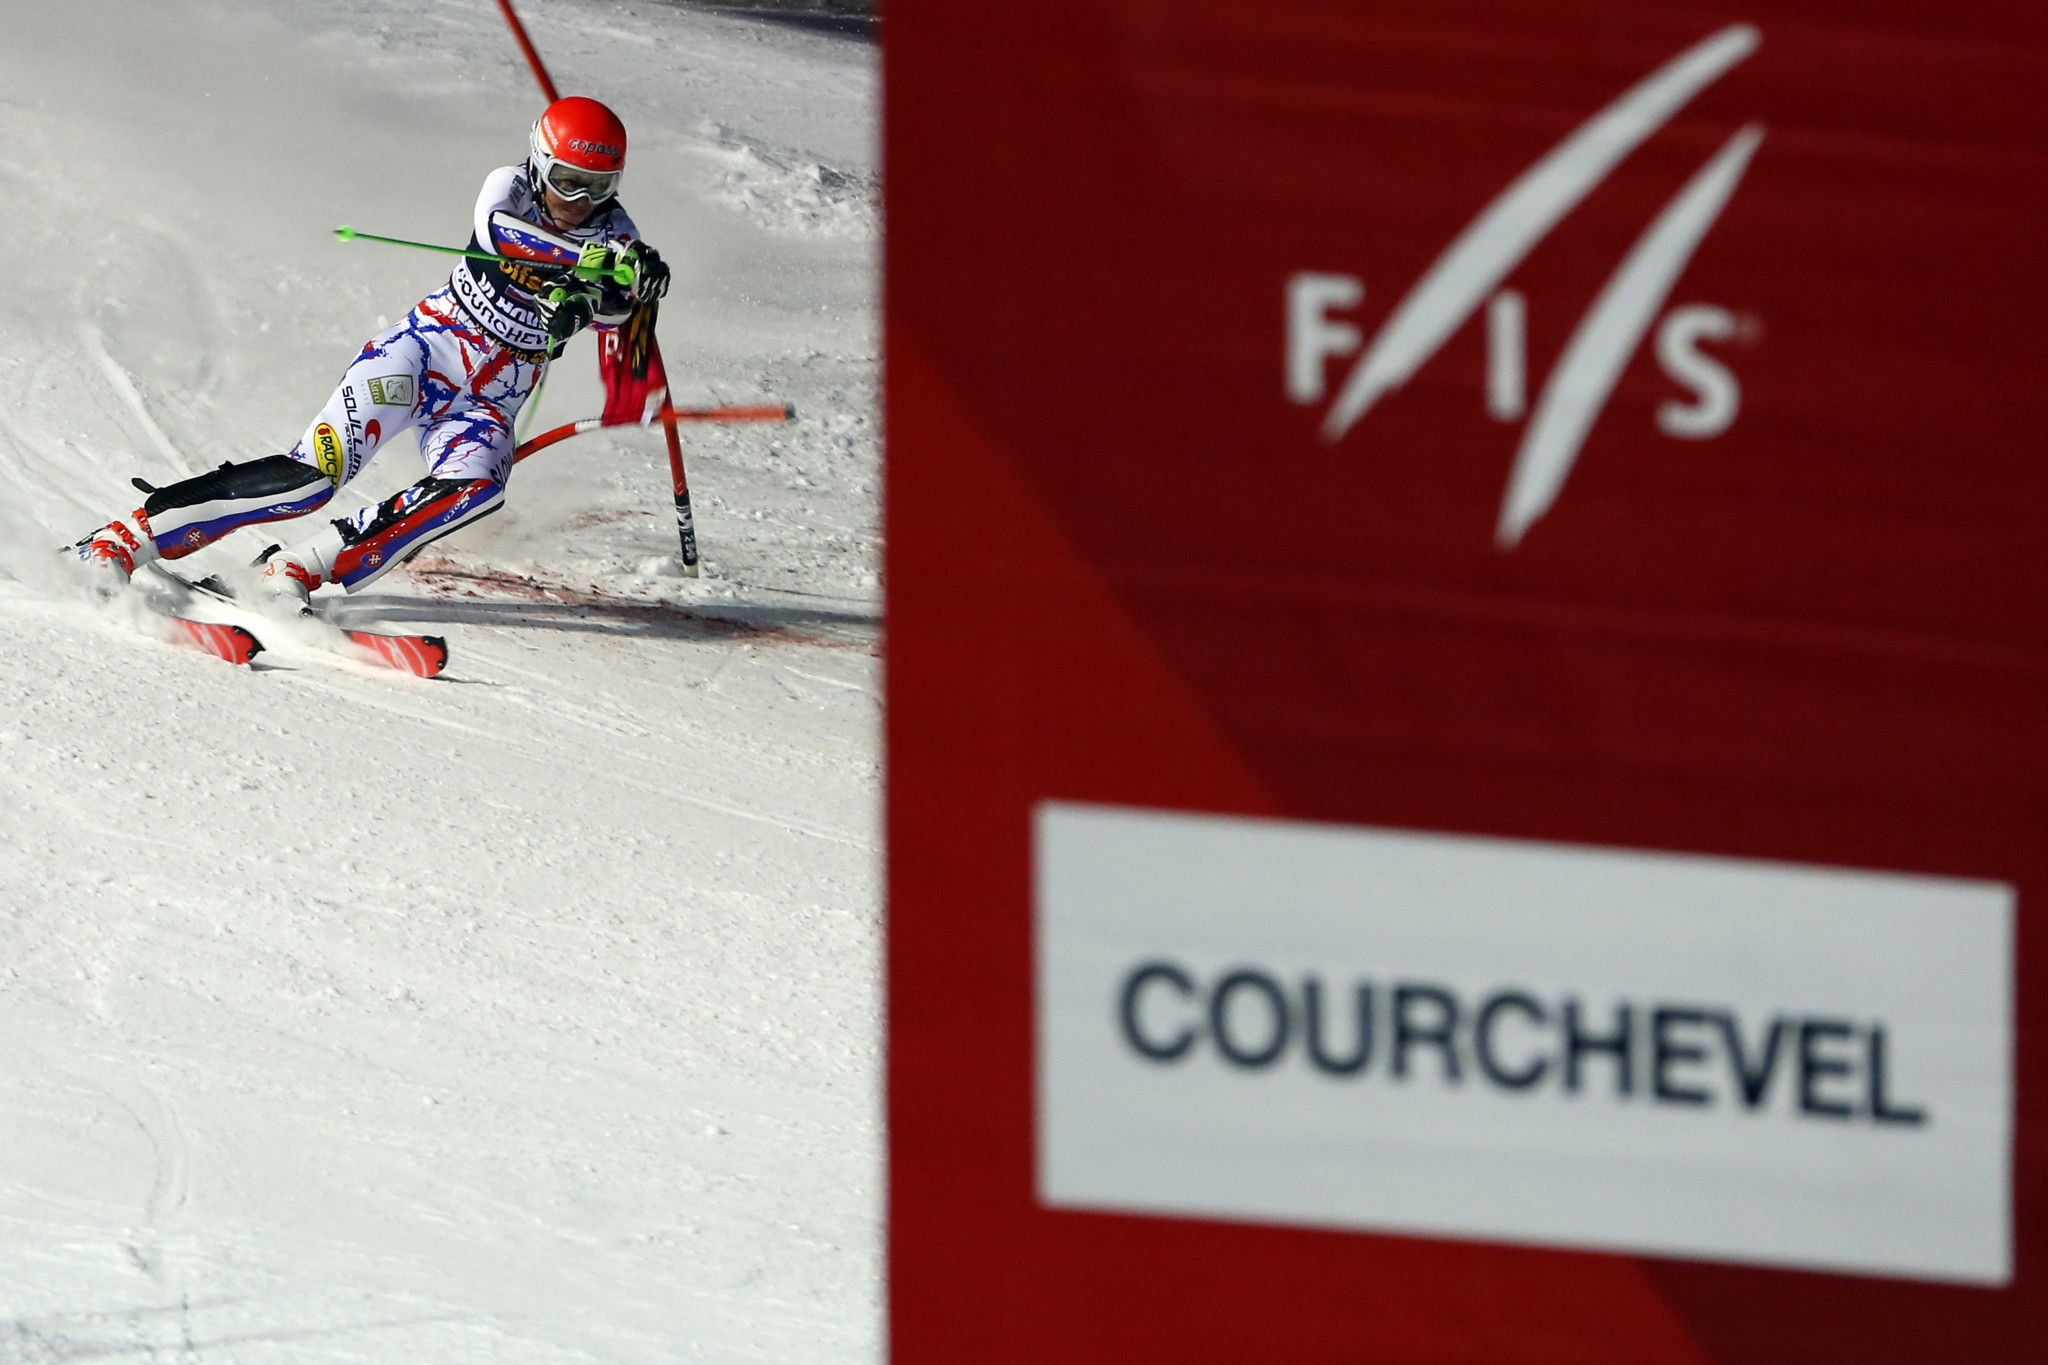 Courchevel-Meribel has hosted a pre-inspection ahead of its hoting of the Alpine World Ski Championships  of 2023 ©Getty Images  